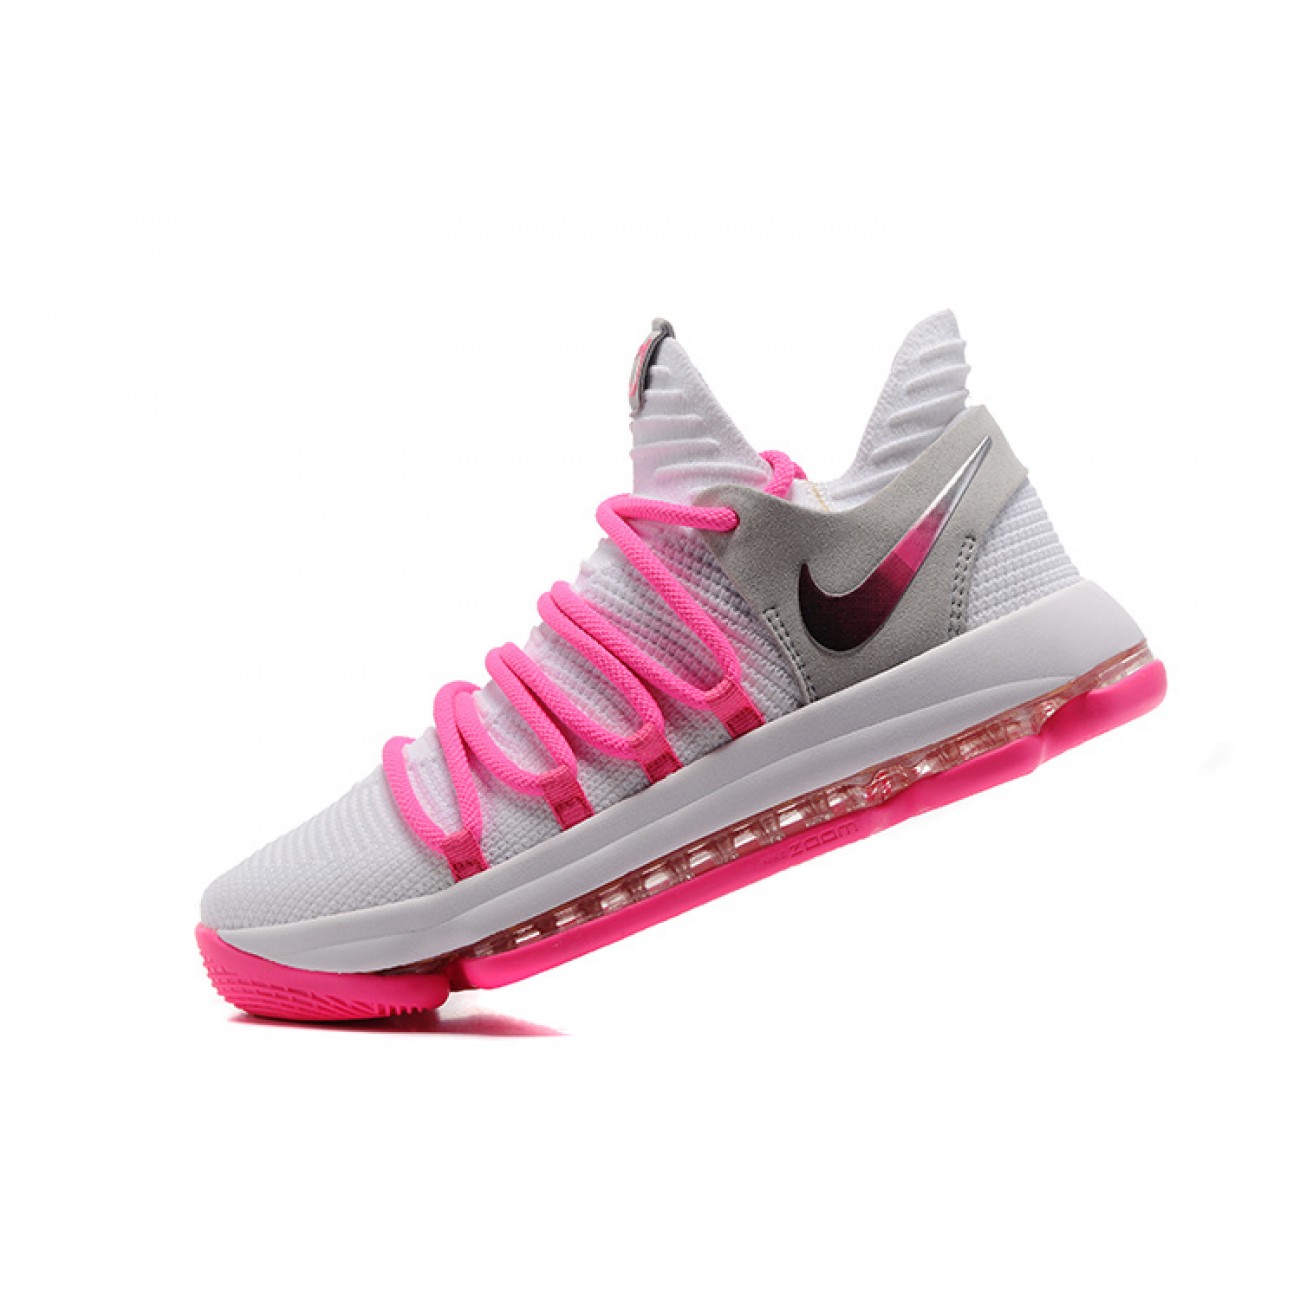 Nike Zoom Kevin Durant KD10 EP White/Pink